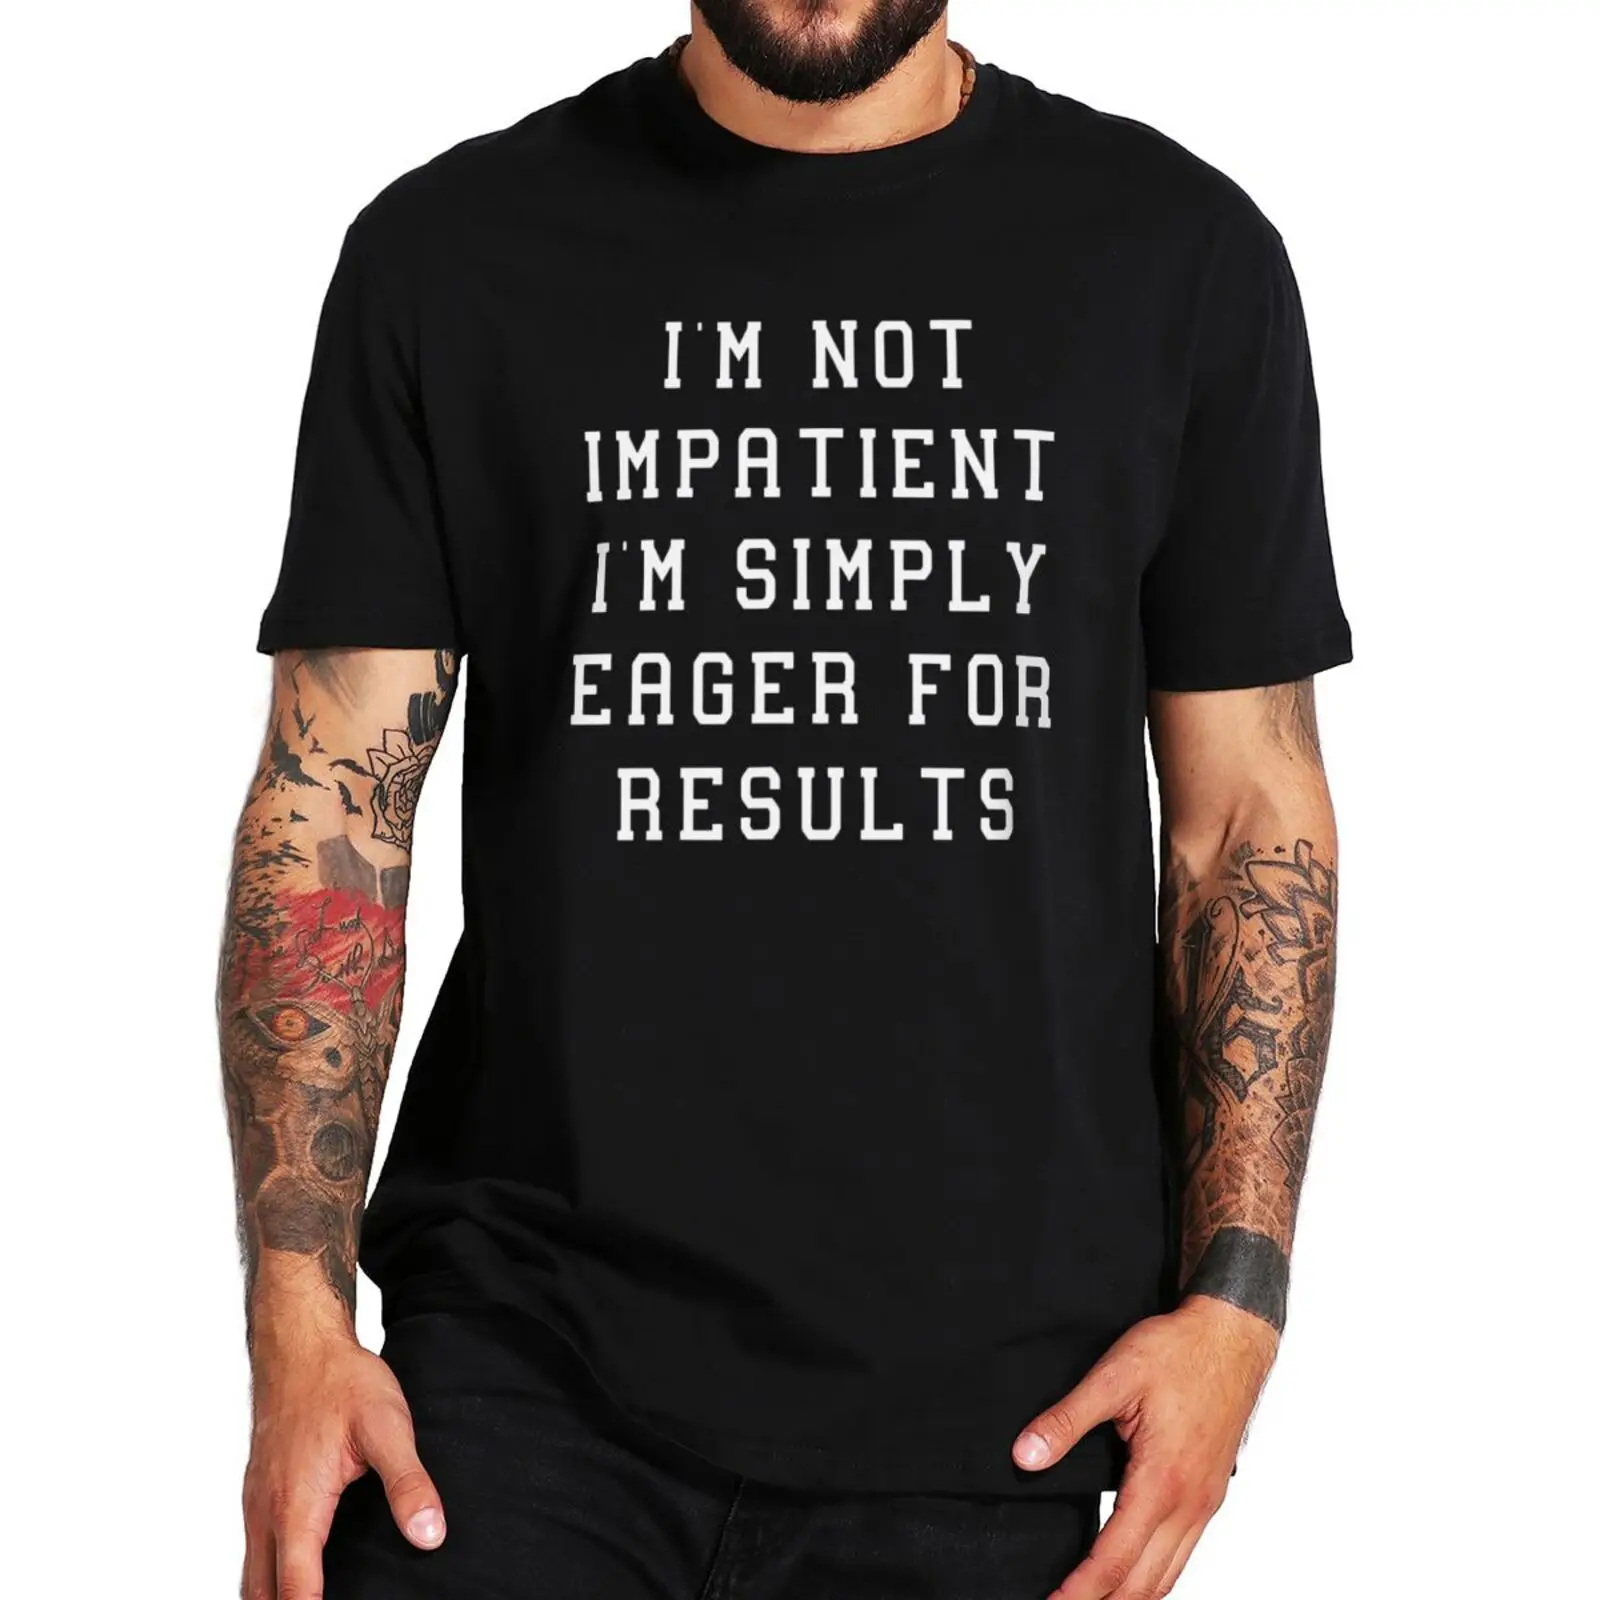 

Mens tee-shirt I'M Not Impatient Eager For Results T Shirt Humor Phrase Sarcastic Gift Top EU Size Cotton Unisex O-neck T-shirts